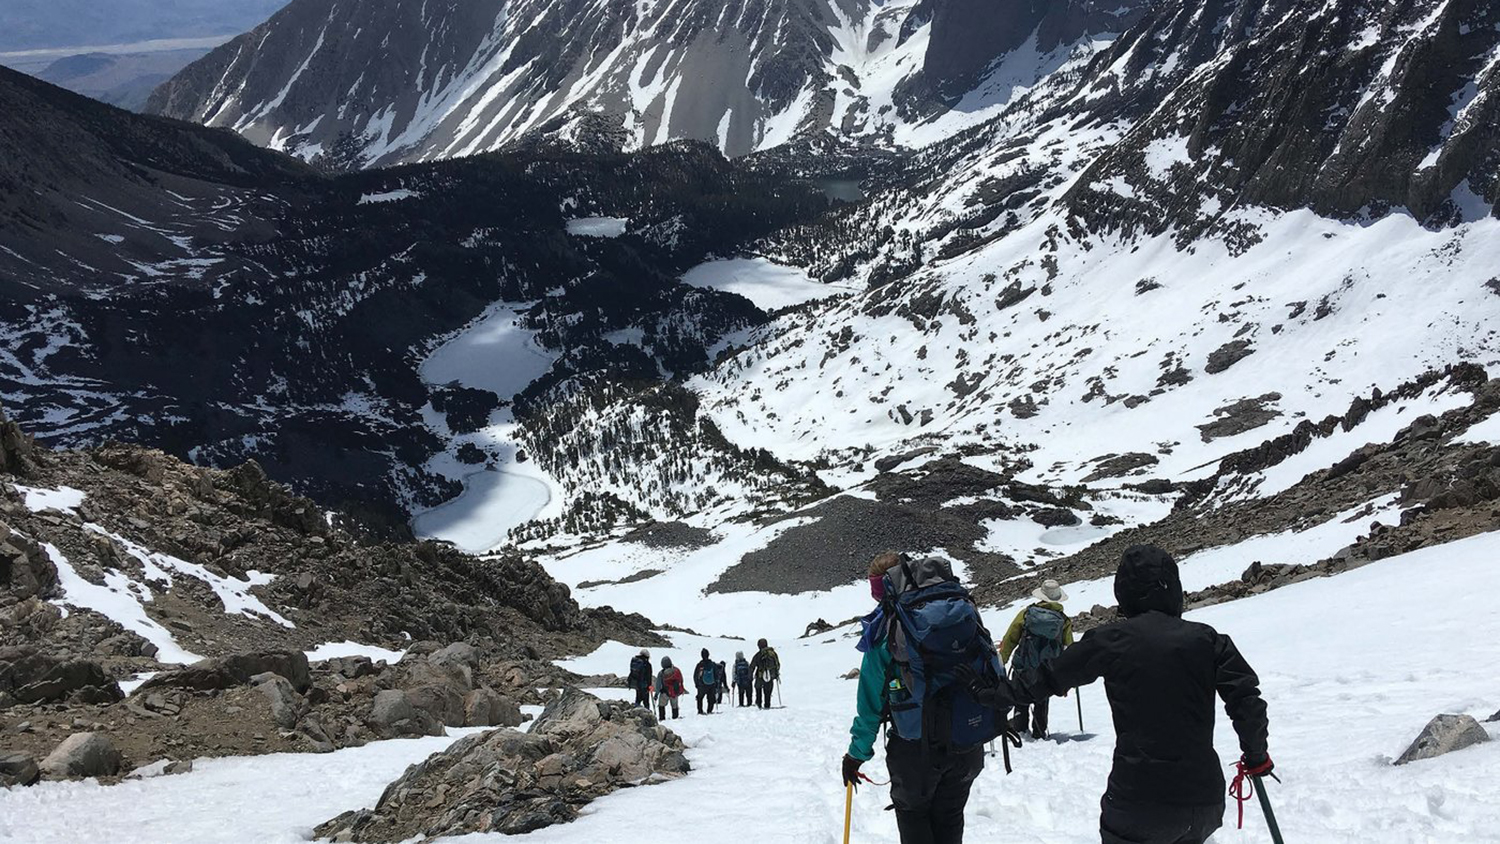 Mao and other Caldwell Fellows hike the snow-covered Sierra Nevada Mountains.